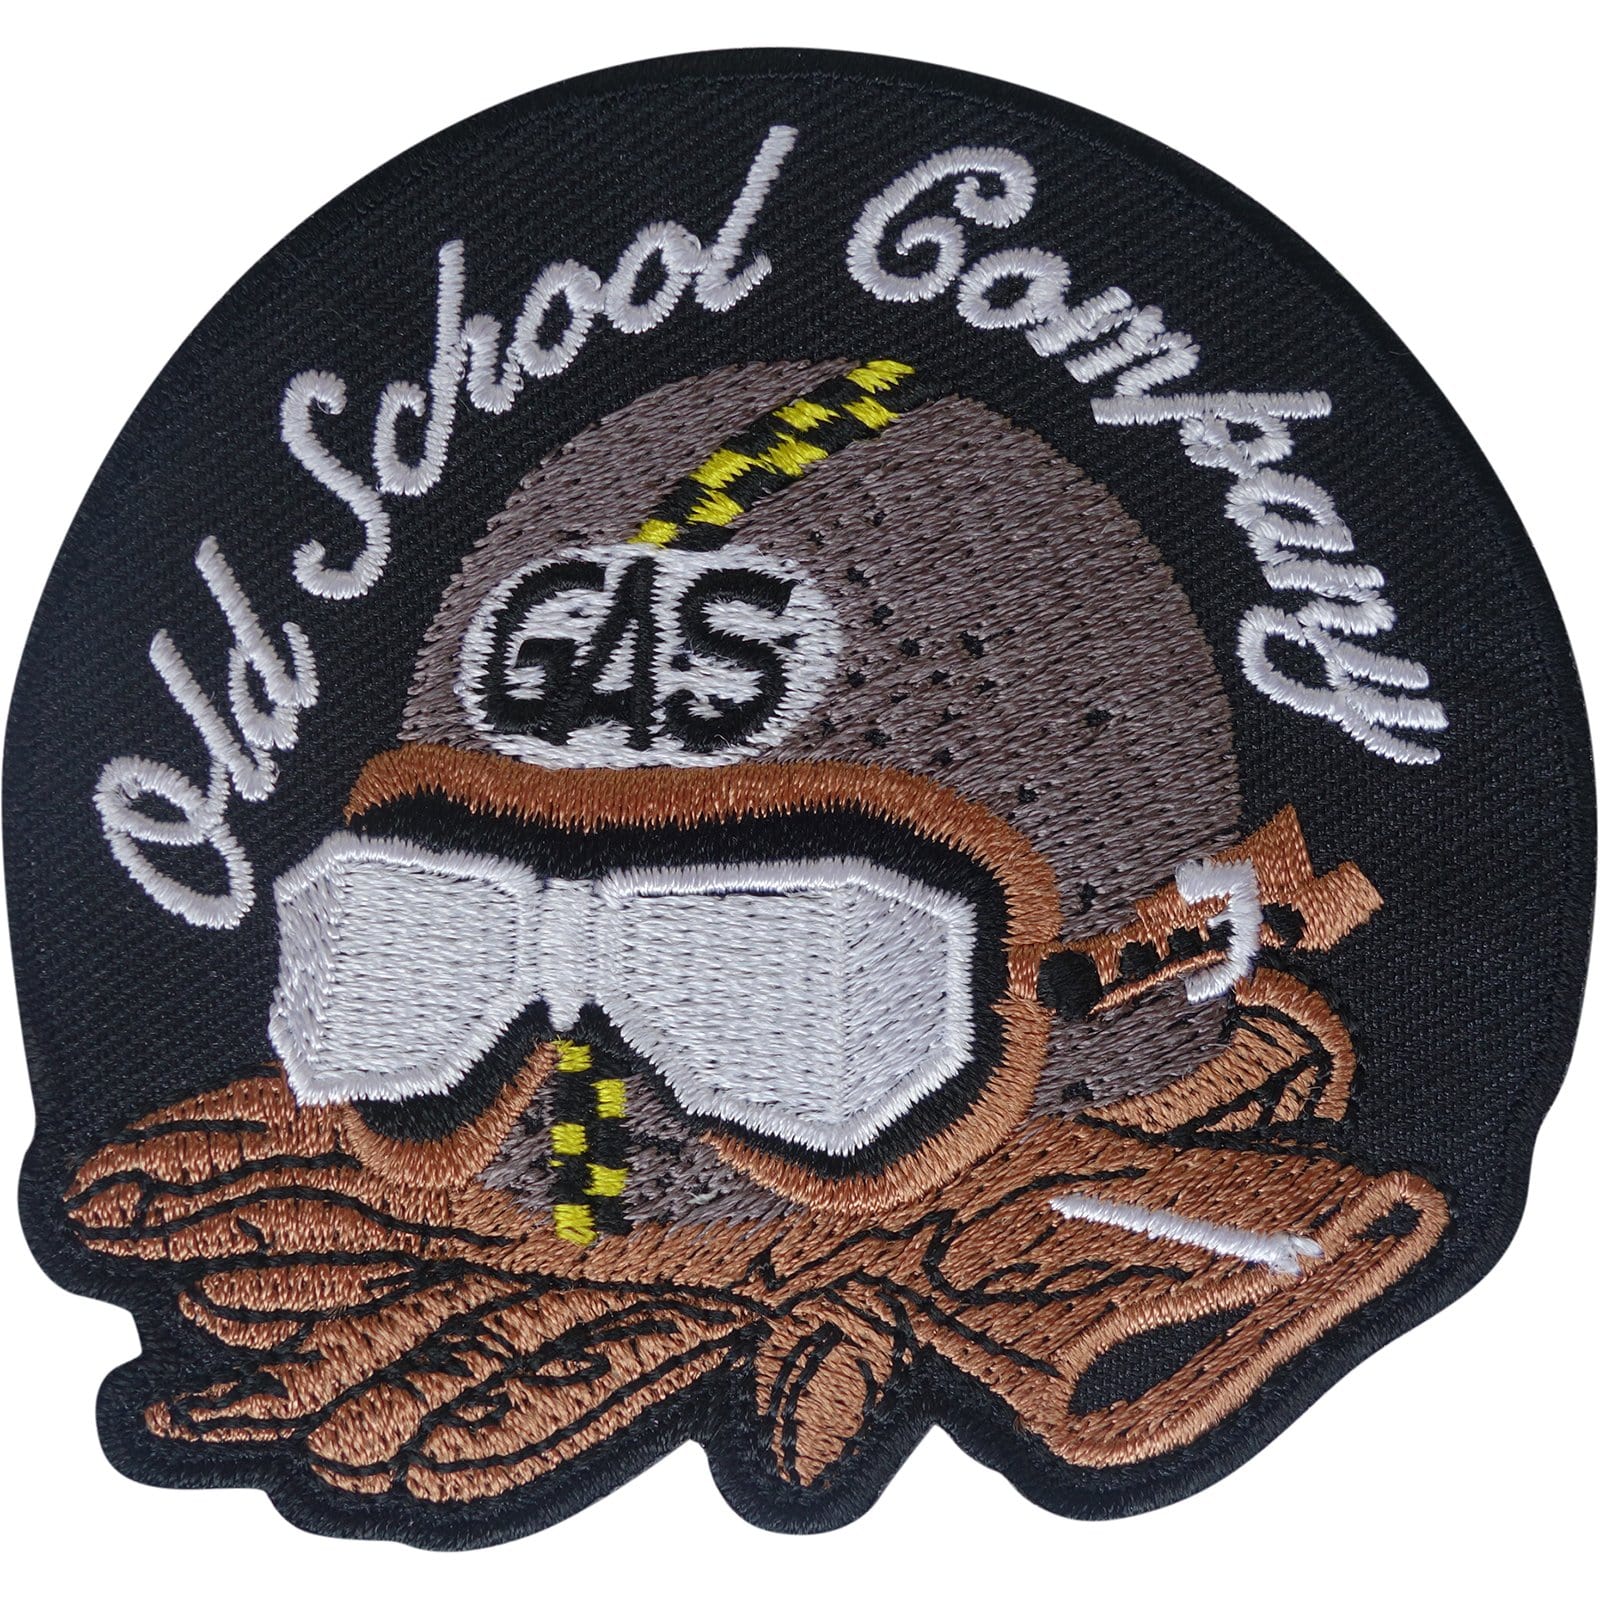 Motorcycle Helmet Motorbike Gloves Goggles Patch Iron Sew On Embroidered Badge